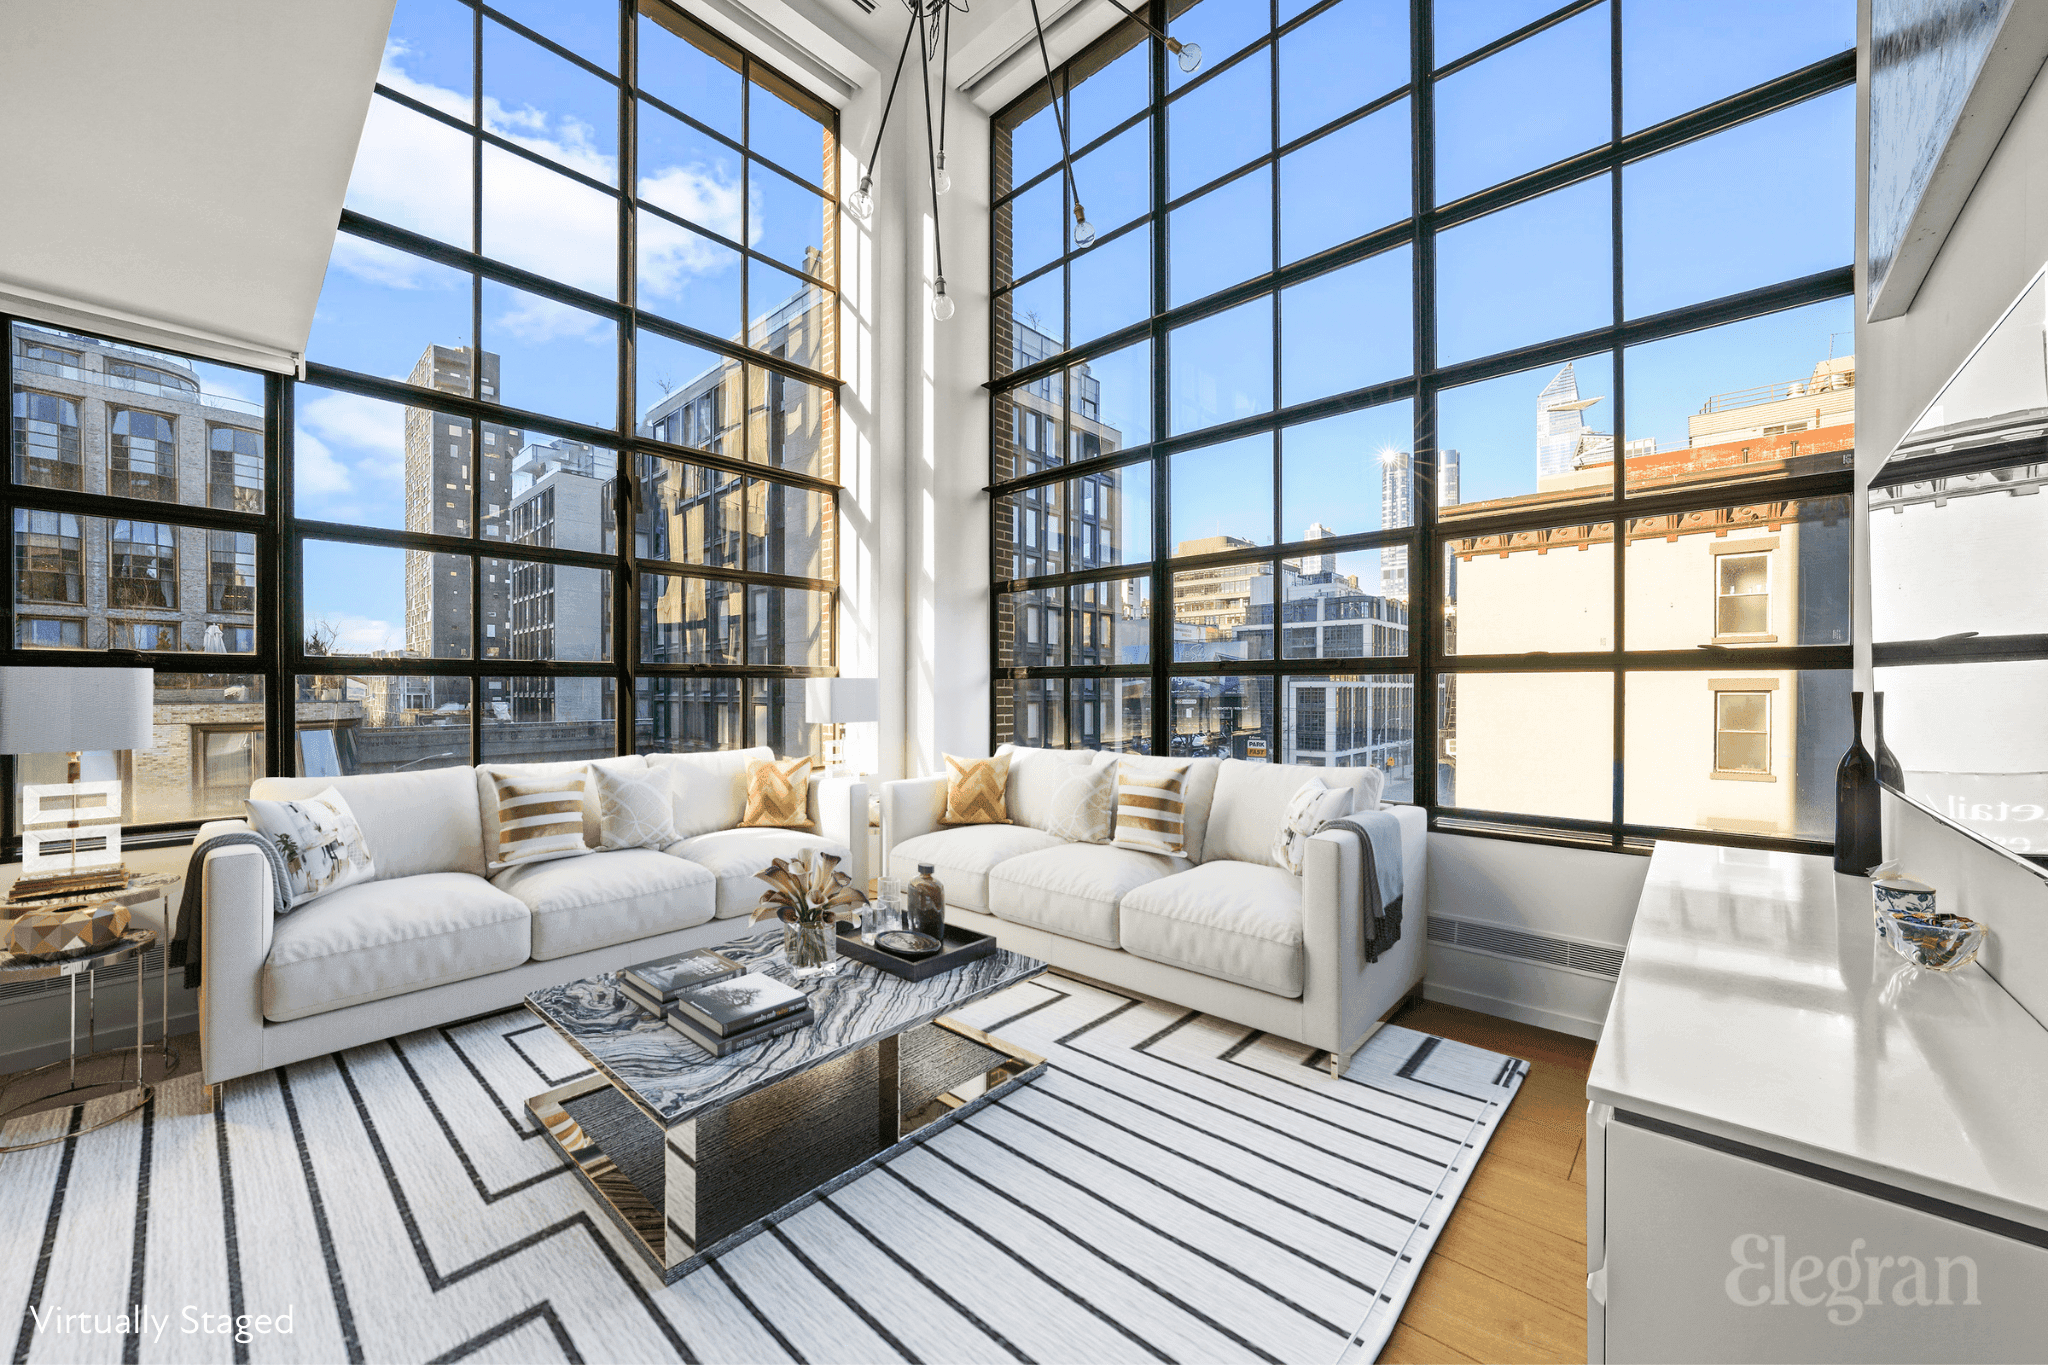 The distinctive charm of this corner duplex begins with its impressive 20ft double height ceilings.